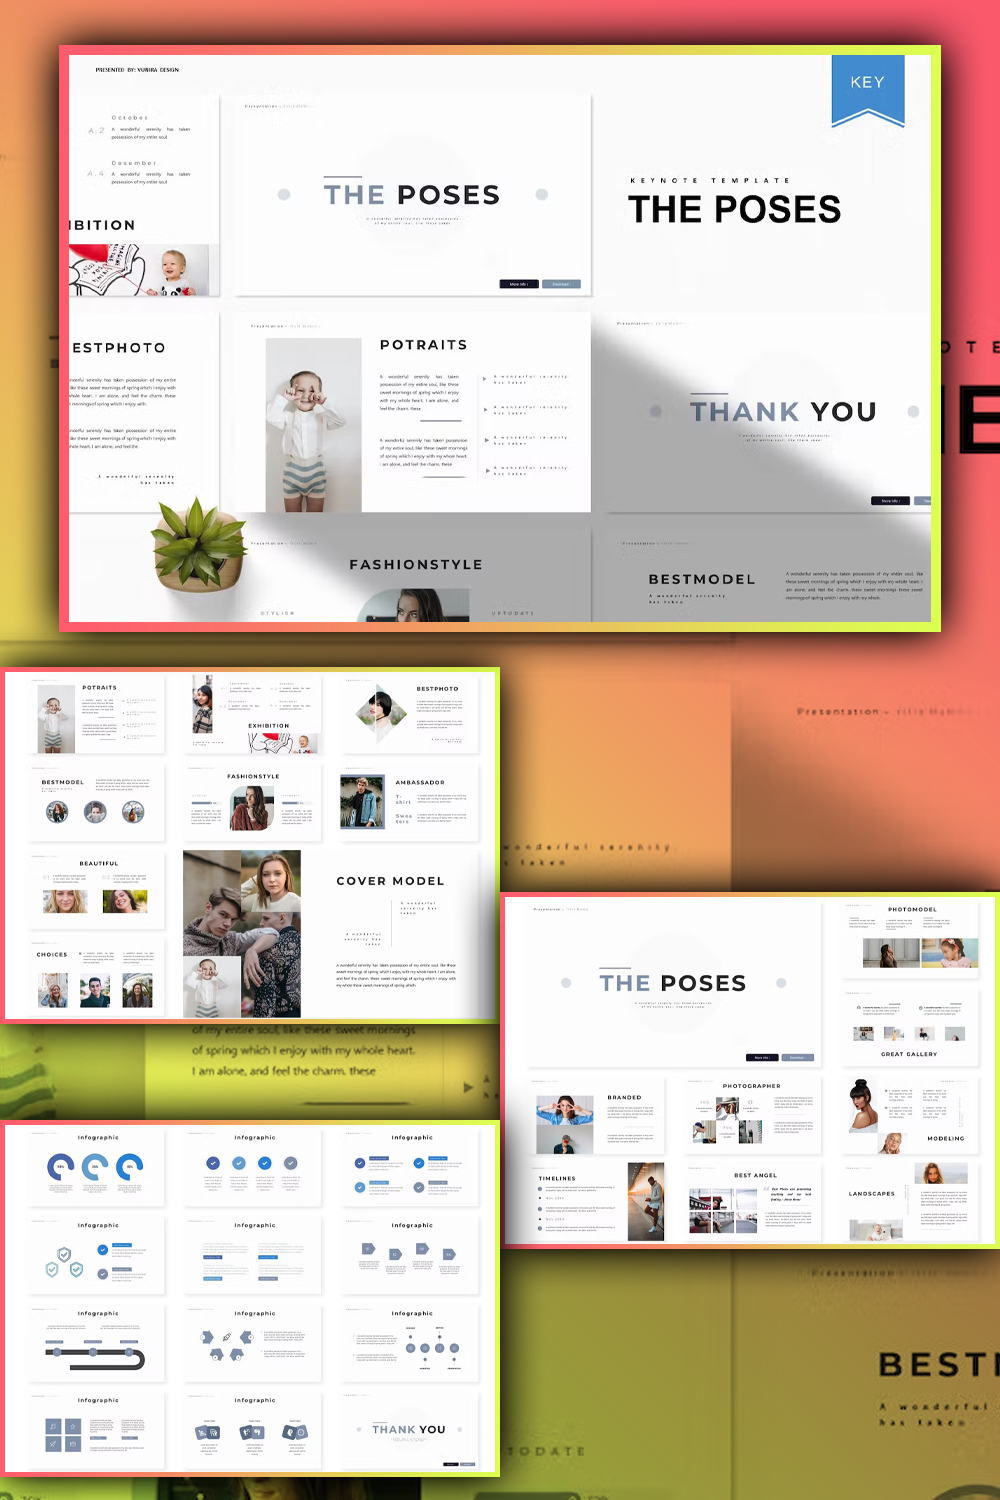 The Poses | Keynote Template - Pinterest.